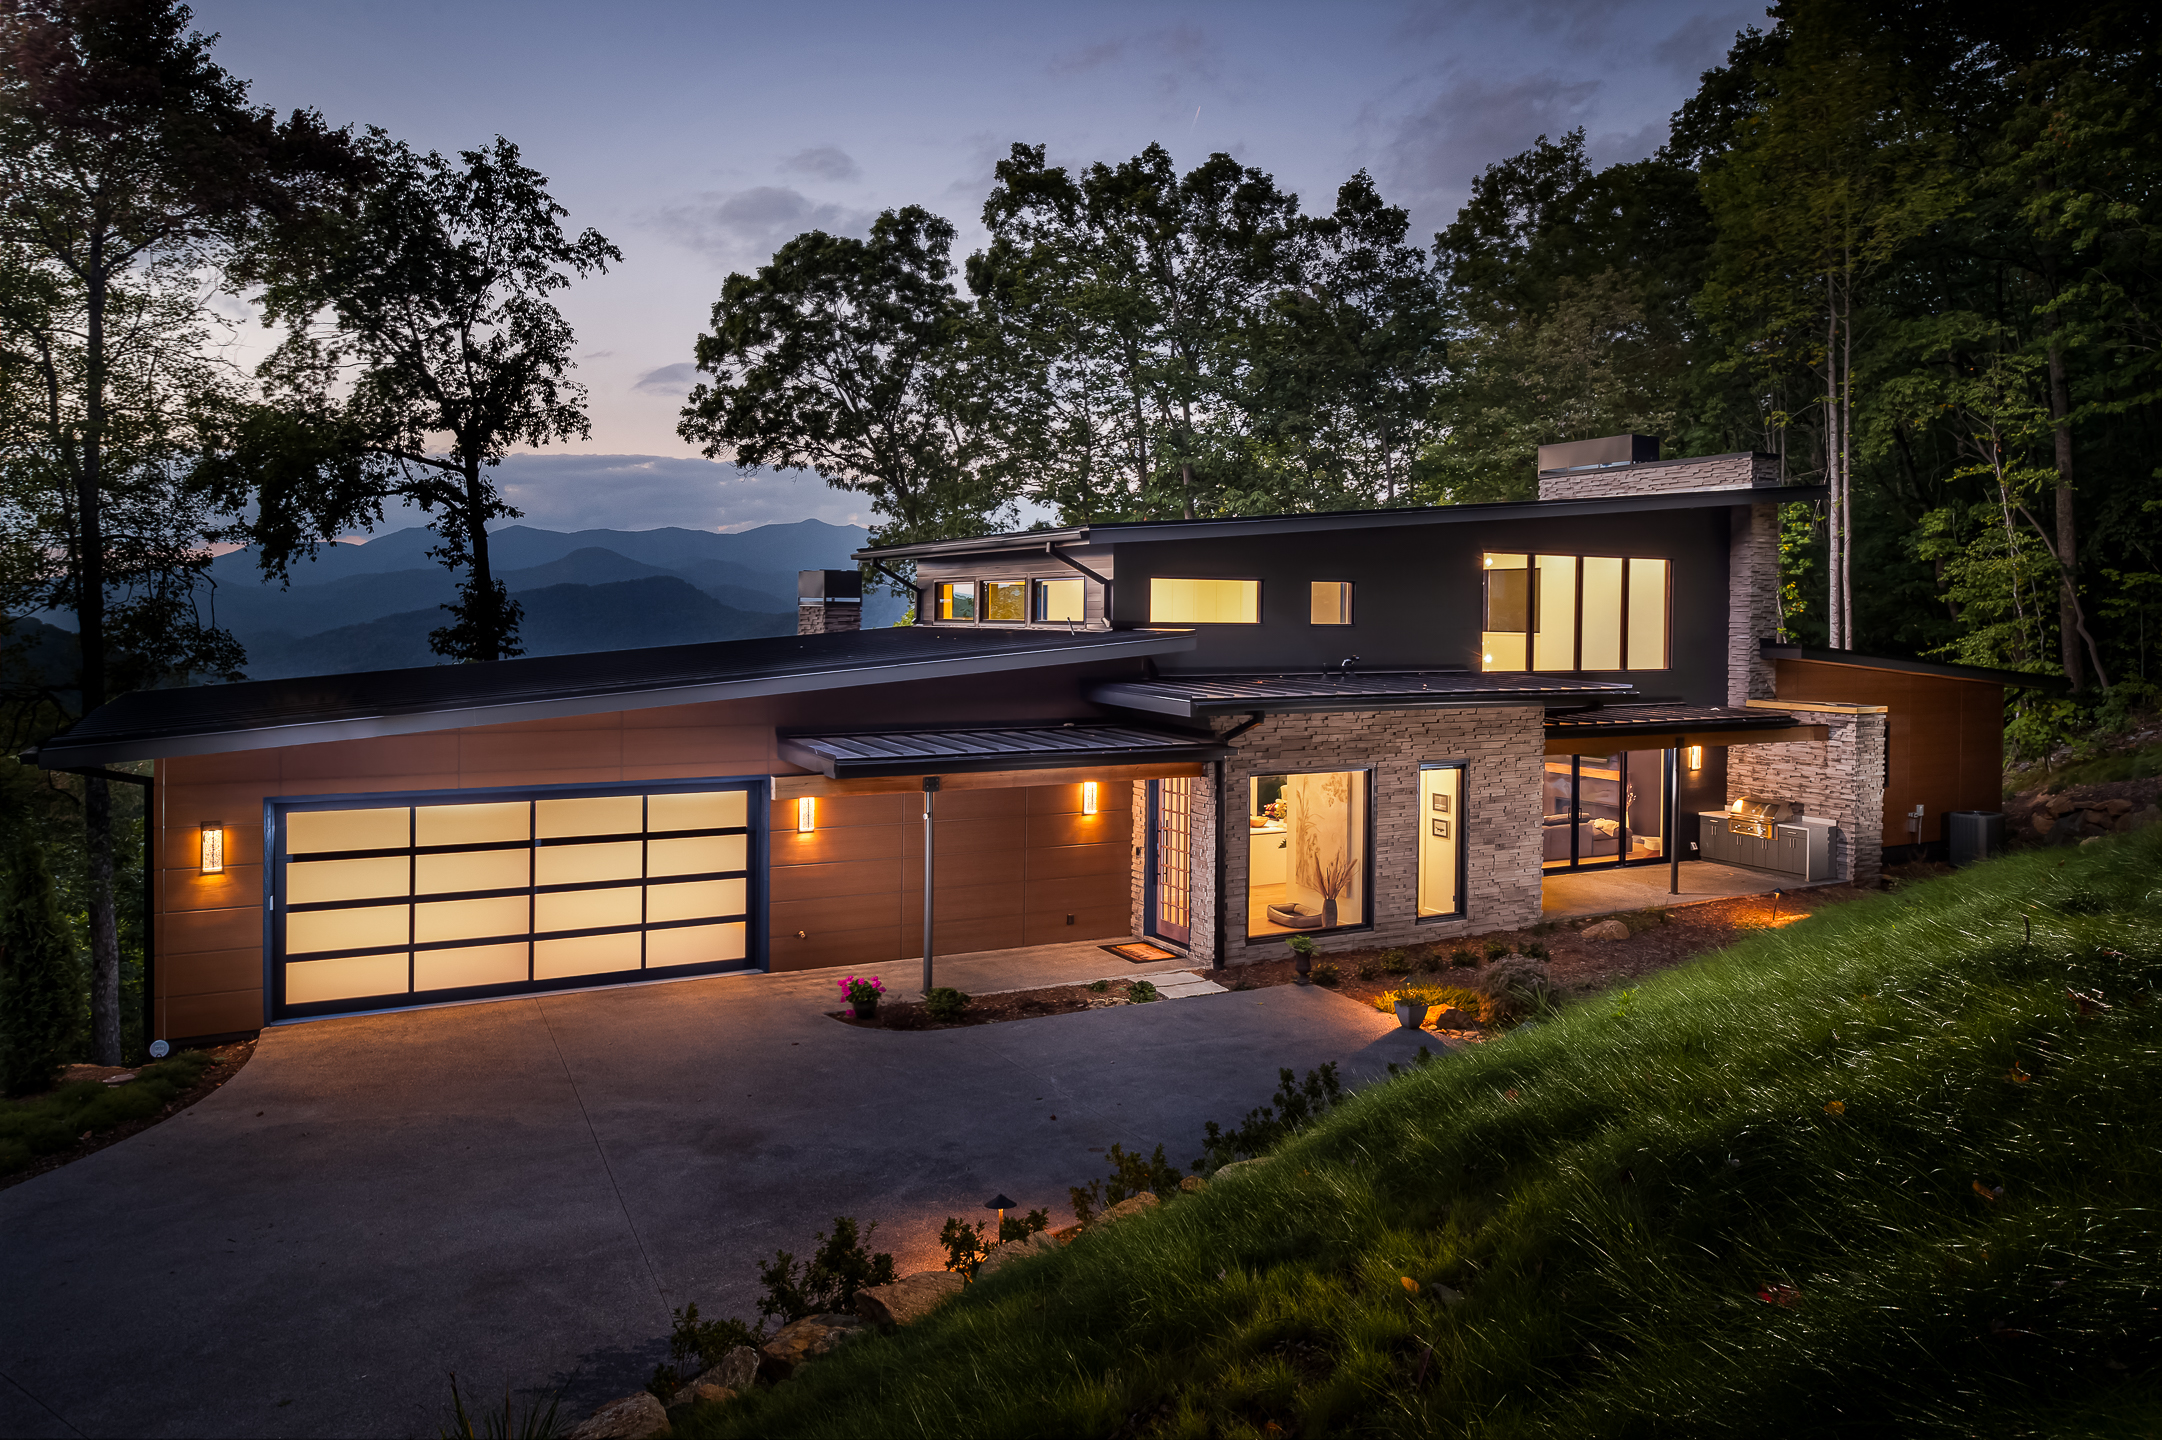 Architectural photography of a modern home in the mountains at dusk by a North Carolina photographer